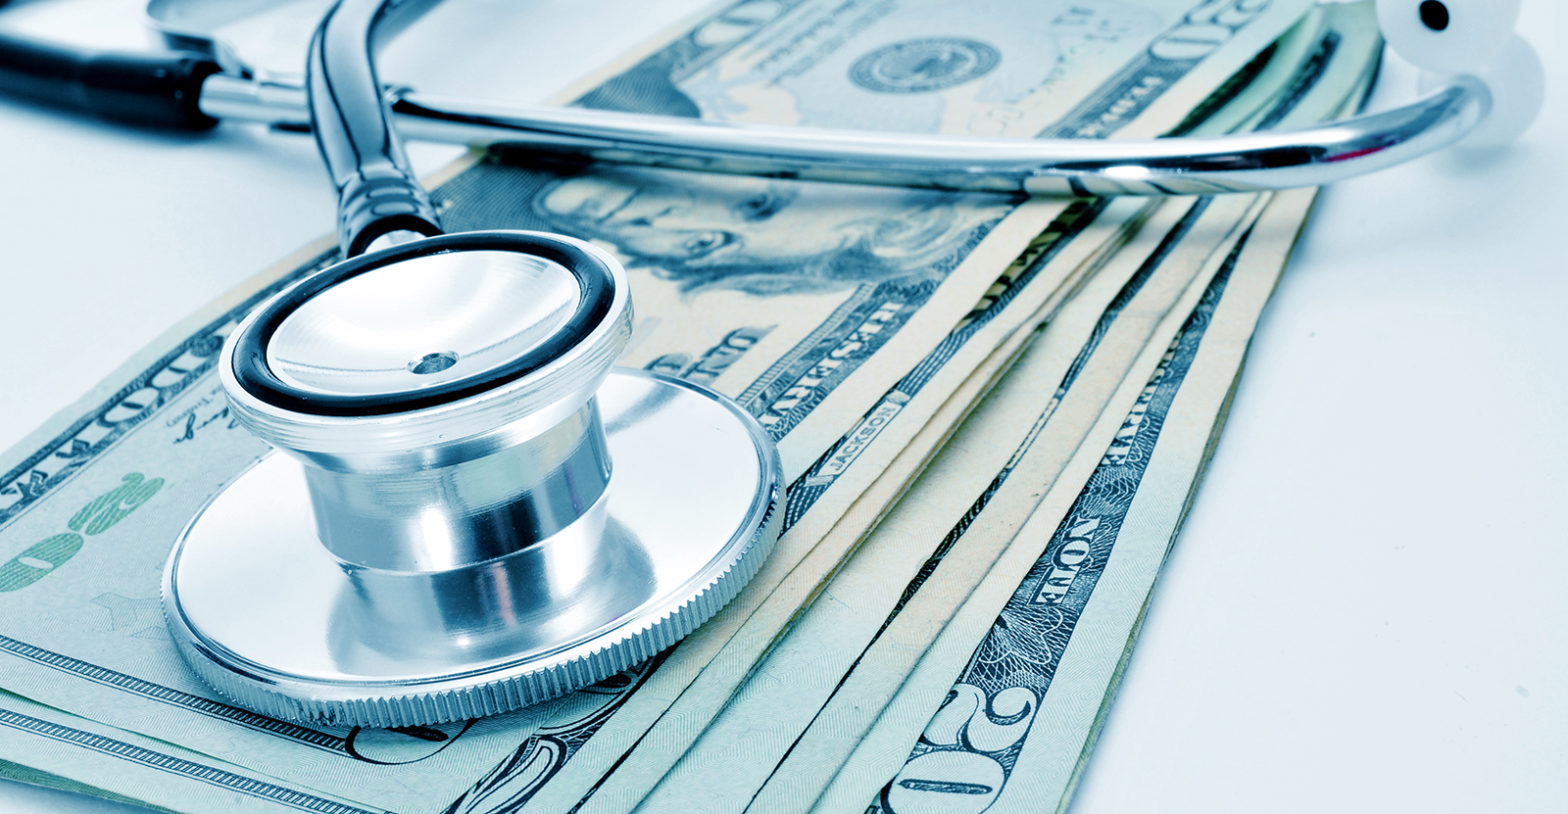 a stethoscope on a pile of US dollar bills, depicting the health care industry concept